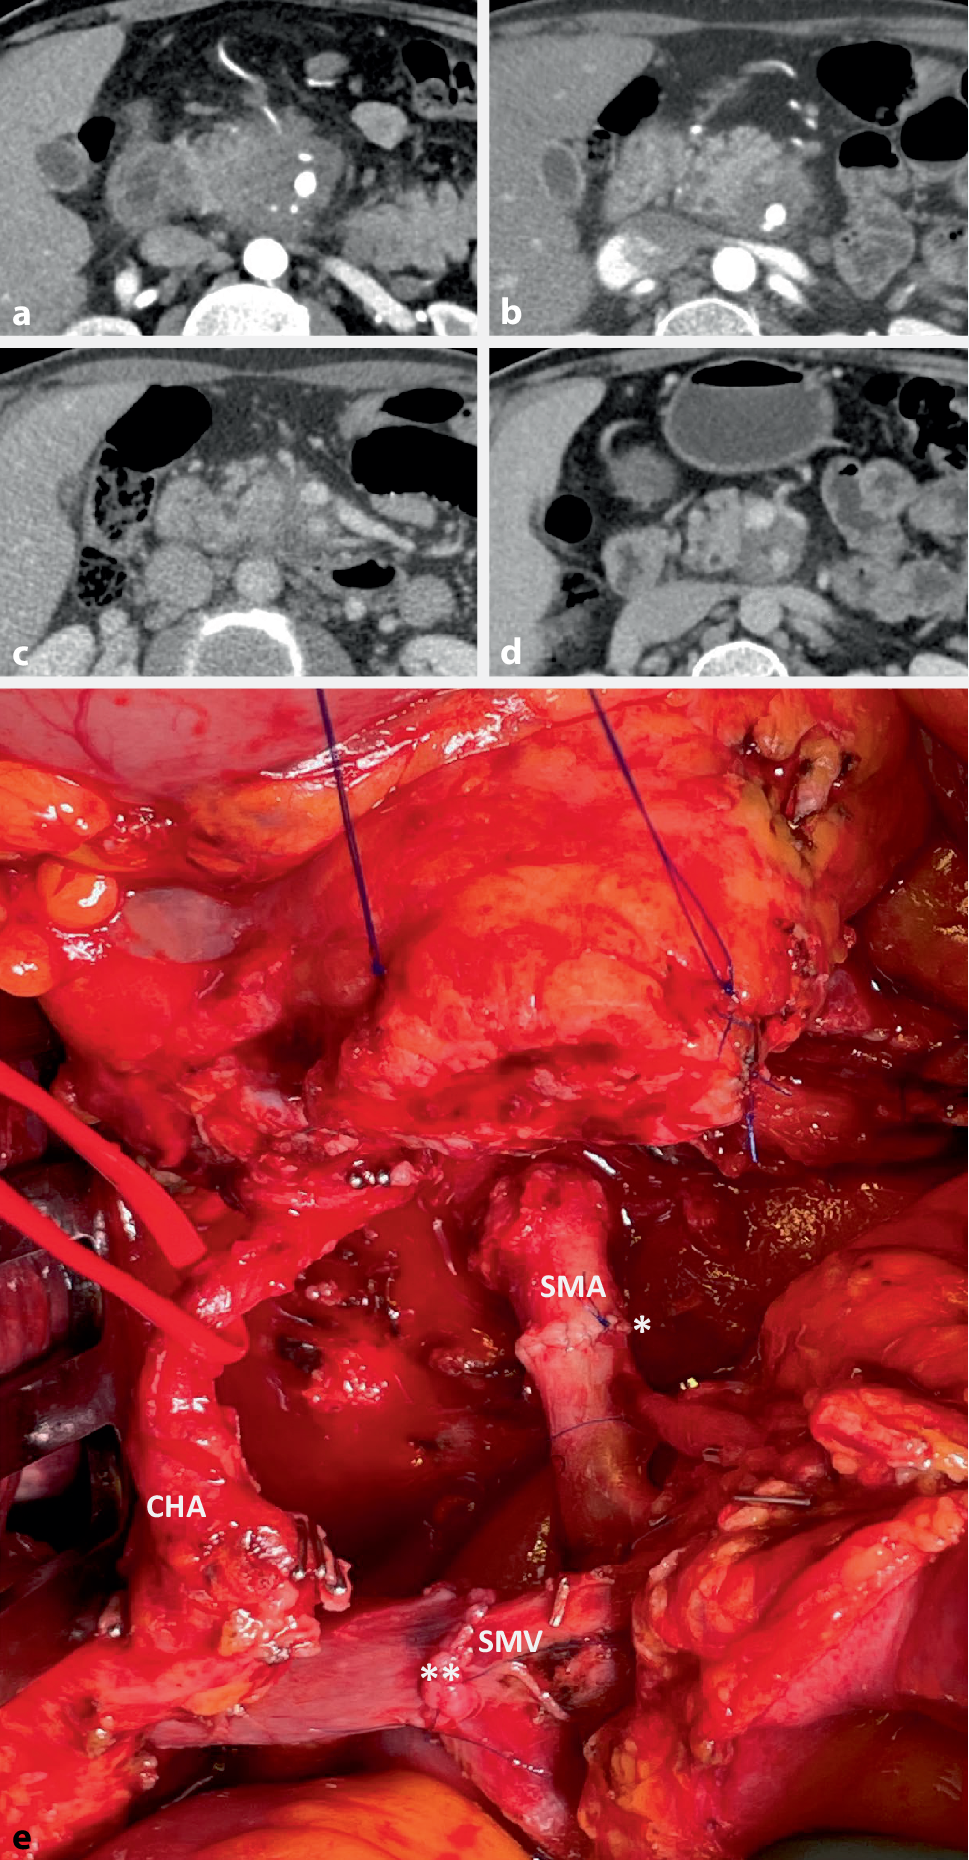 Intraoperative strategies and techniques to achieve surgical radicality in pancreatic cancer